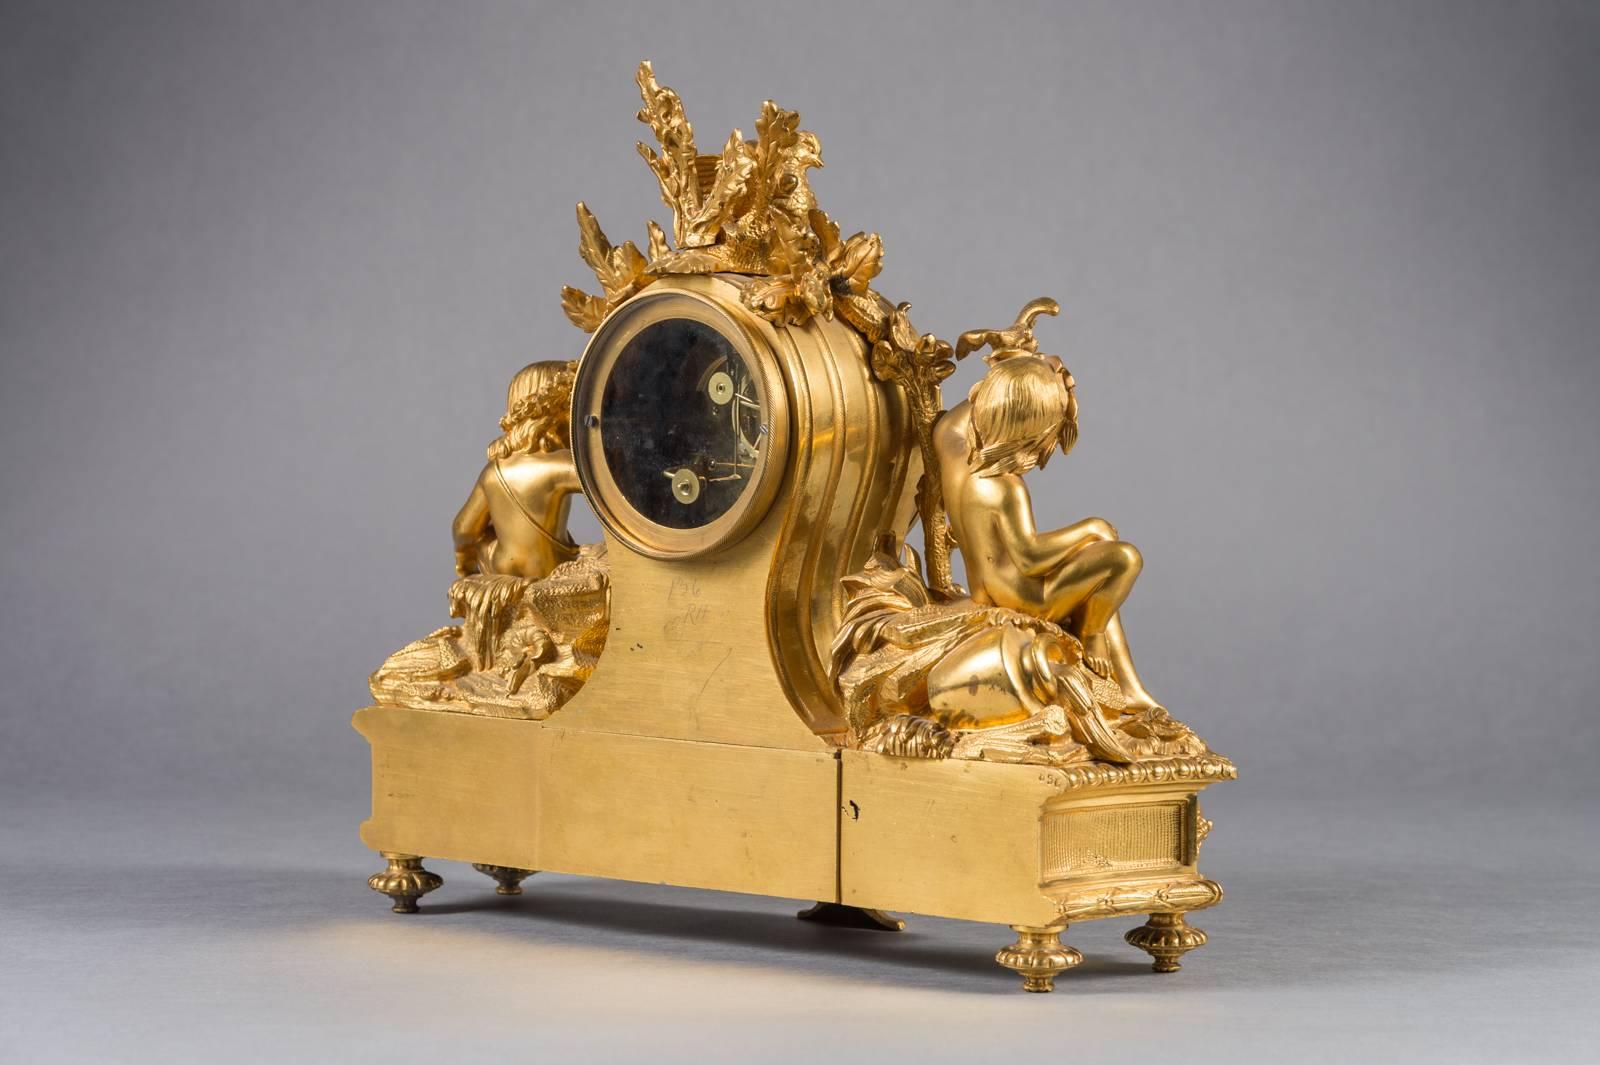 A very Fine late 19th century french ormolu bronze & sevres porcelain mantel clock, 

France, circa 1880. 

A very well made mantel clock with original ormolu gilt and sevres style painted porcelain panels. The high quality movement is working